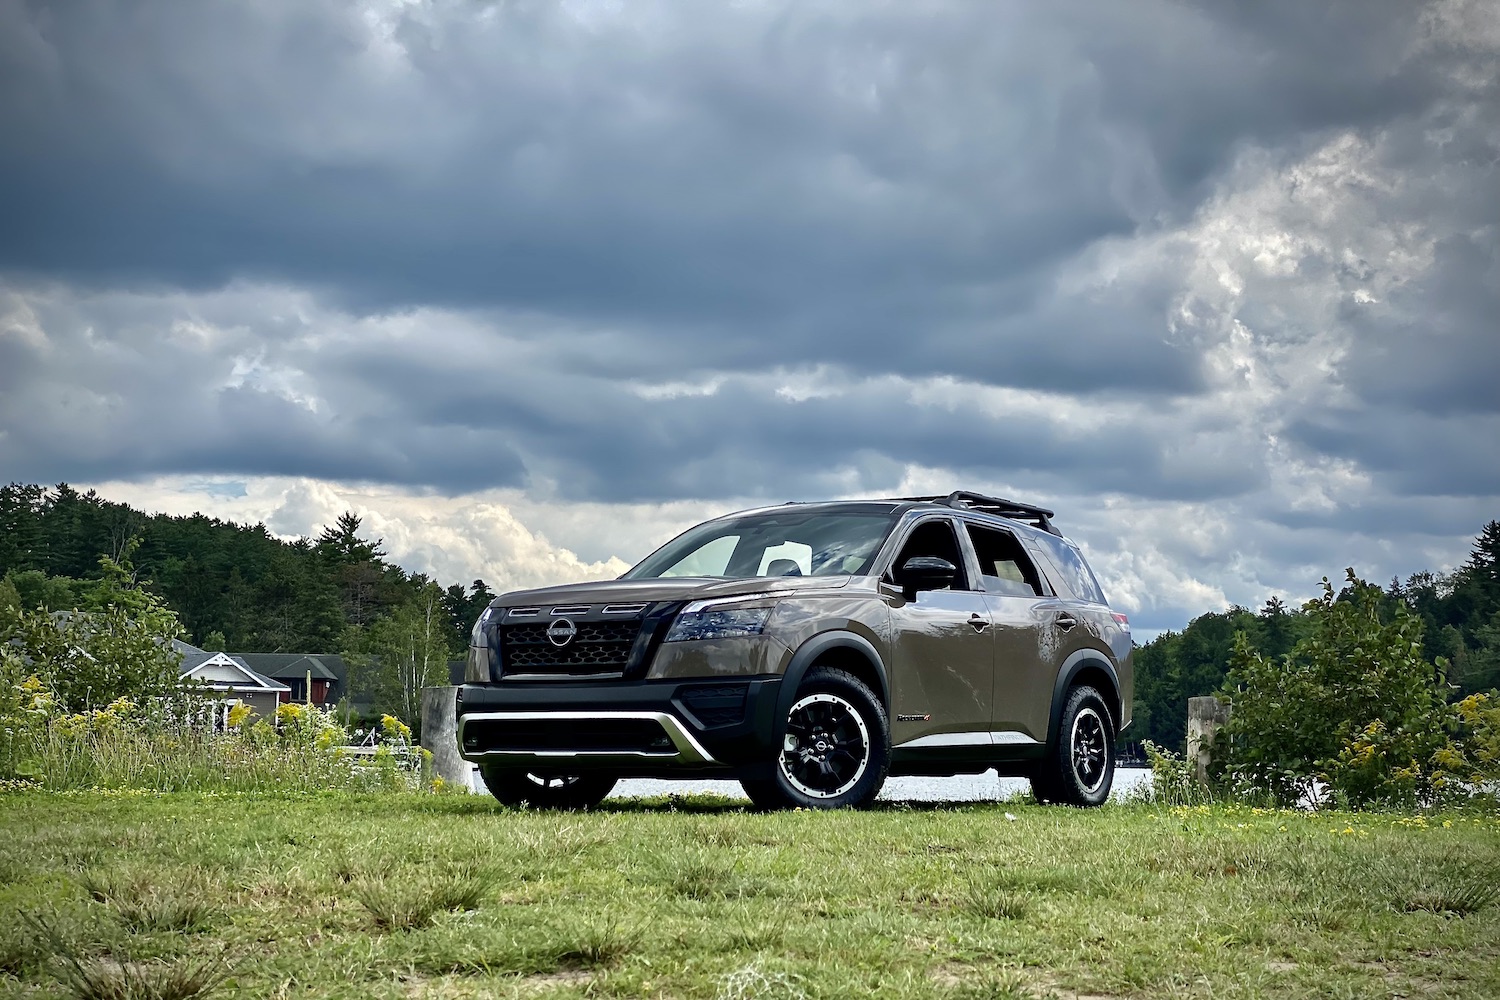 Front end angle of 2023 Nissan Pathfinder Rock Creek from driver's side in front of a lake on a grassy field with dark skies.